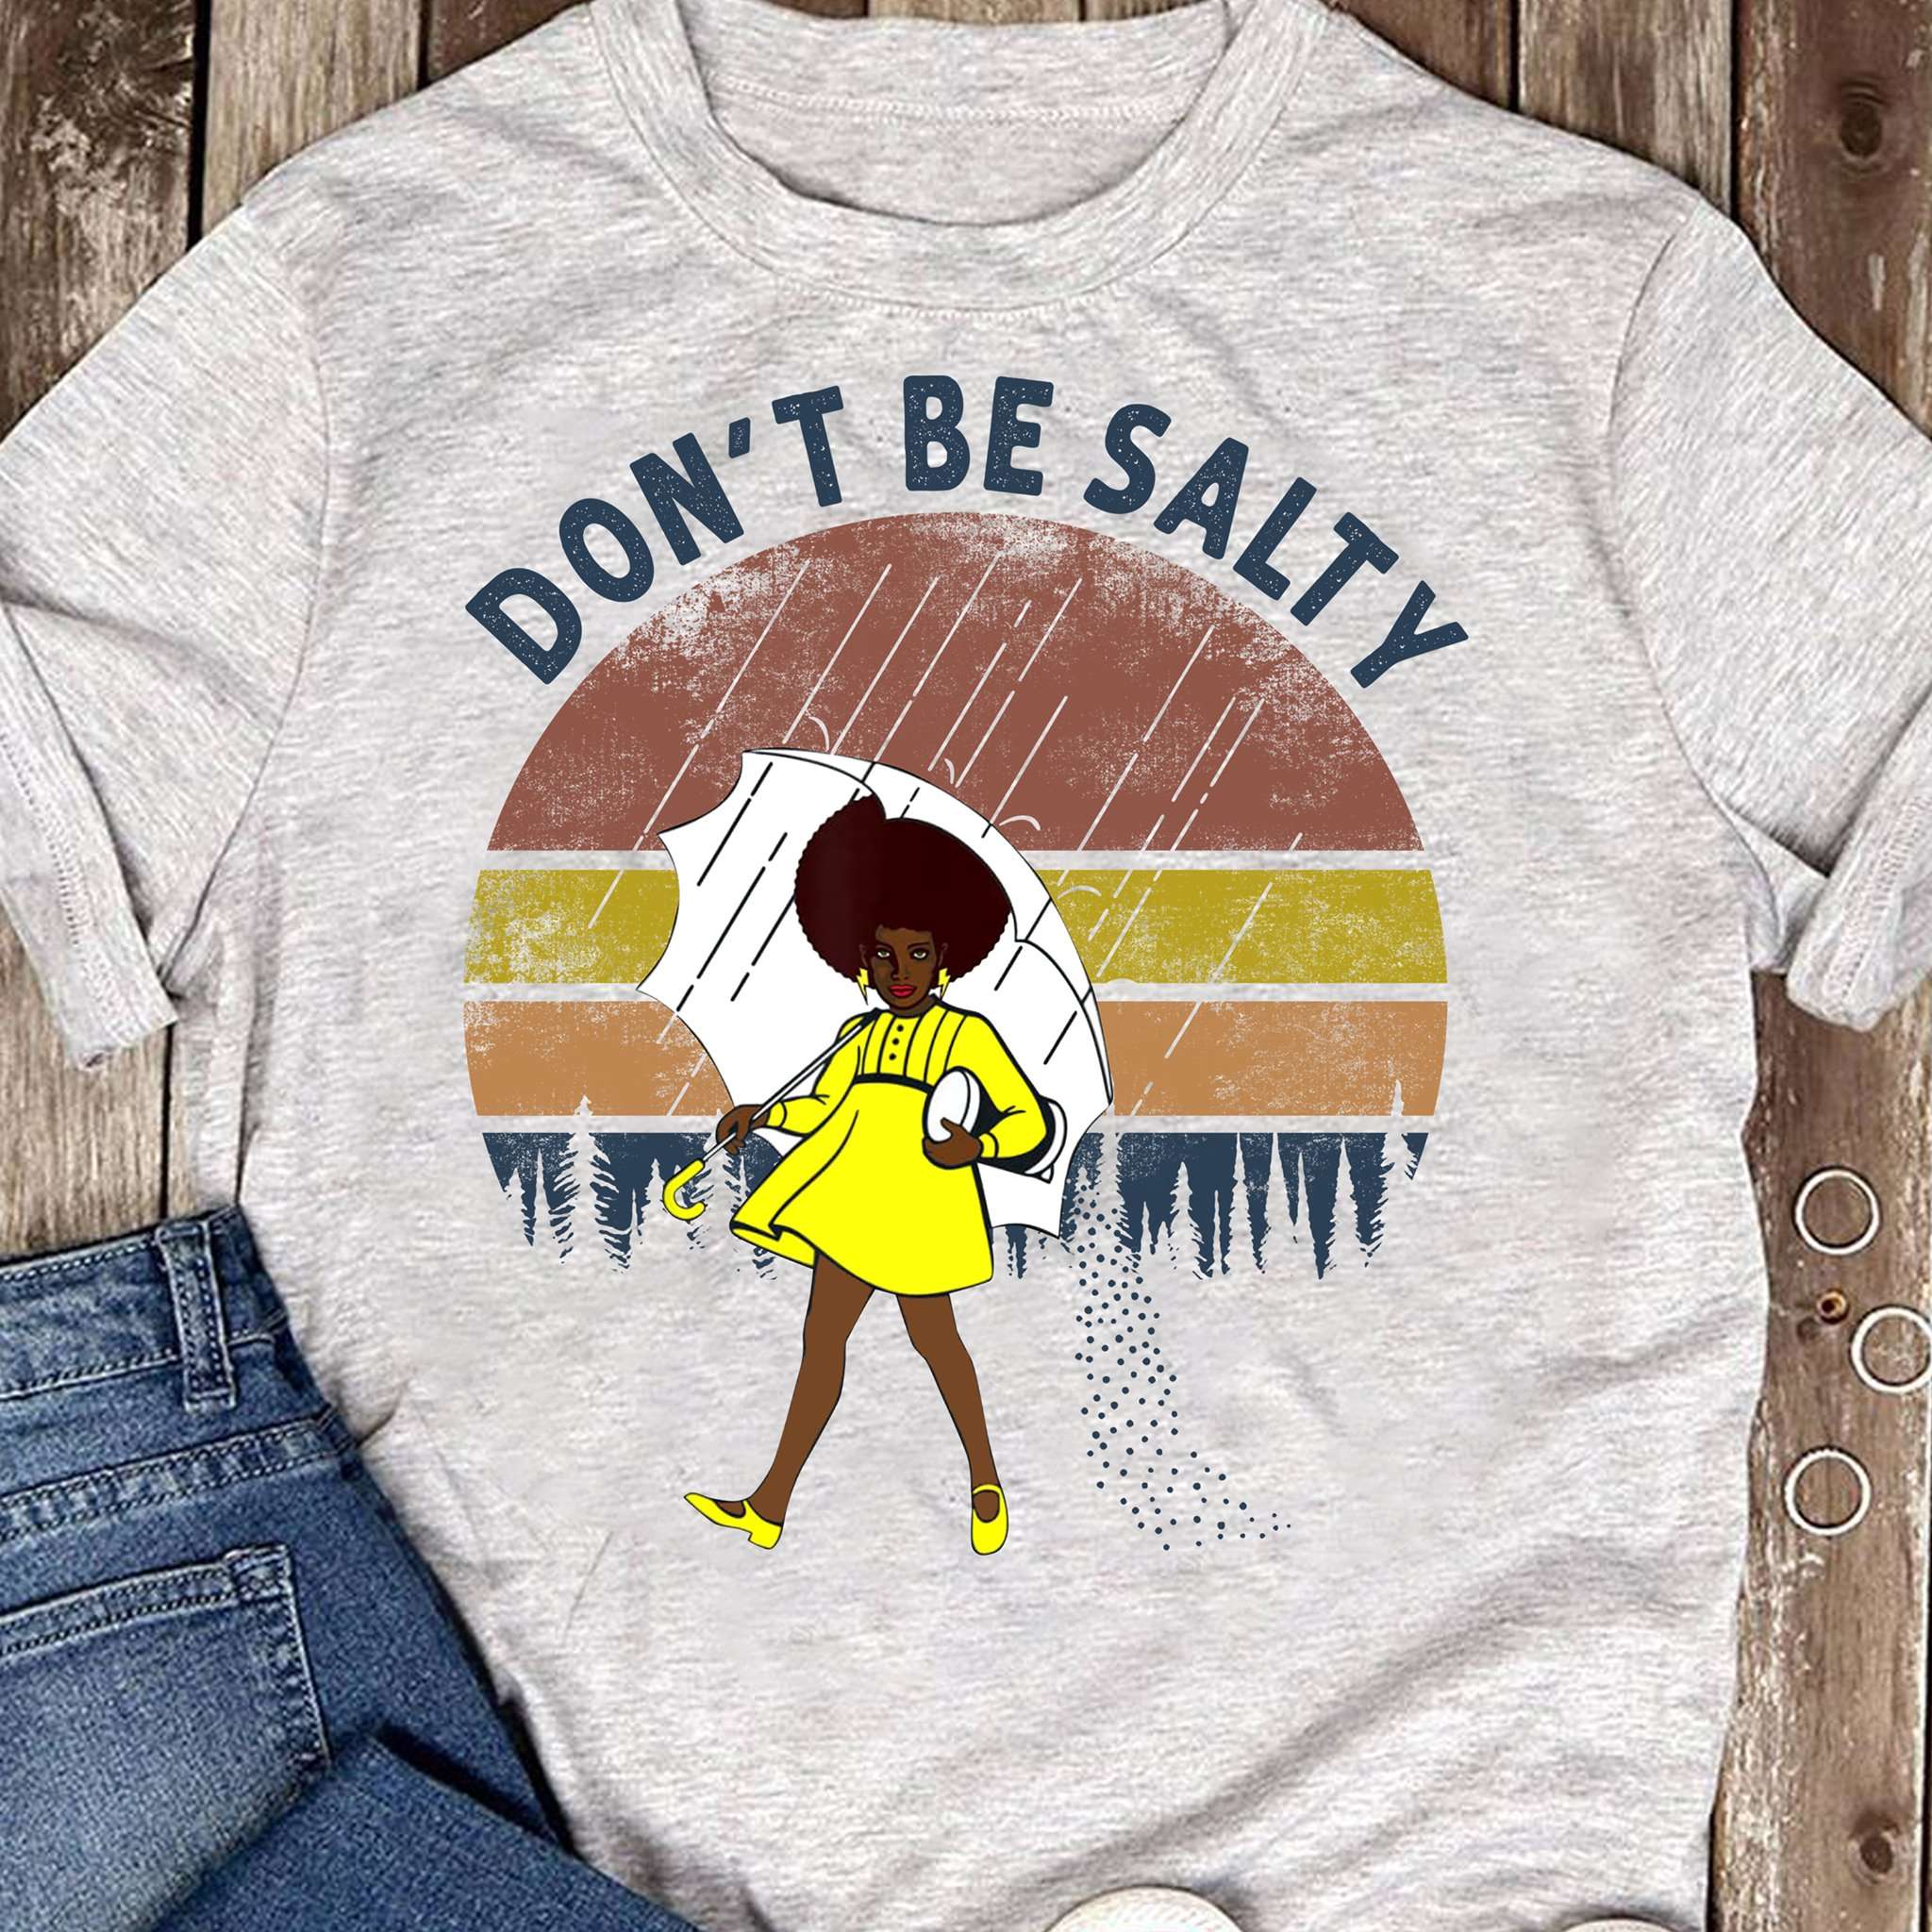 Don't be salty - Black woman with umbrella, salty black girl